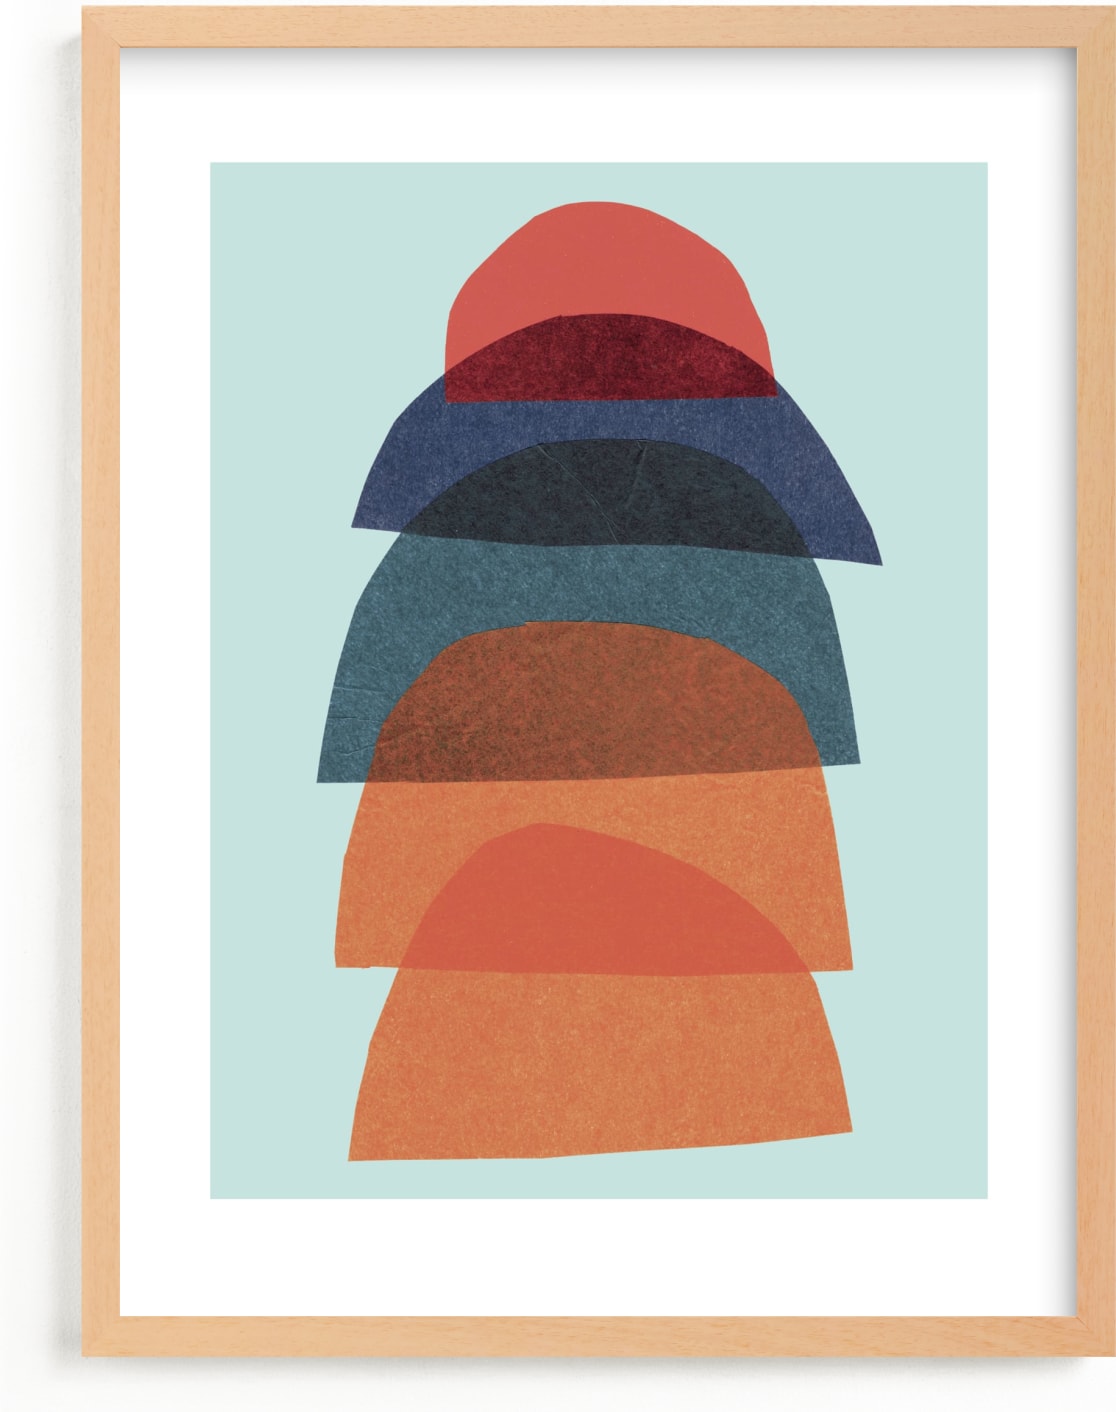 This is a blue kids wall art by Carrie Moradi called paper stack.